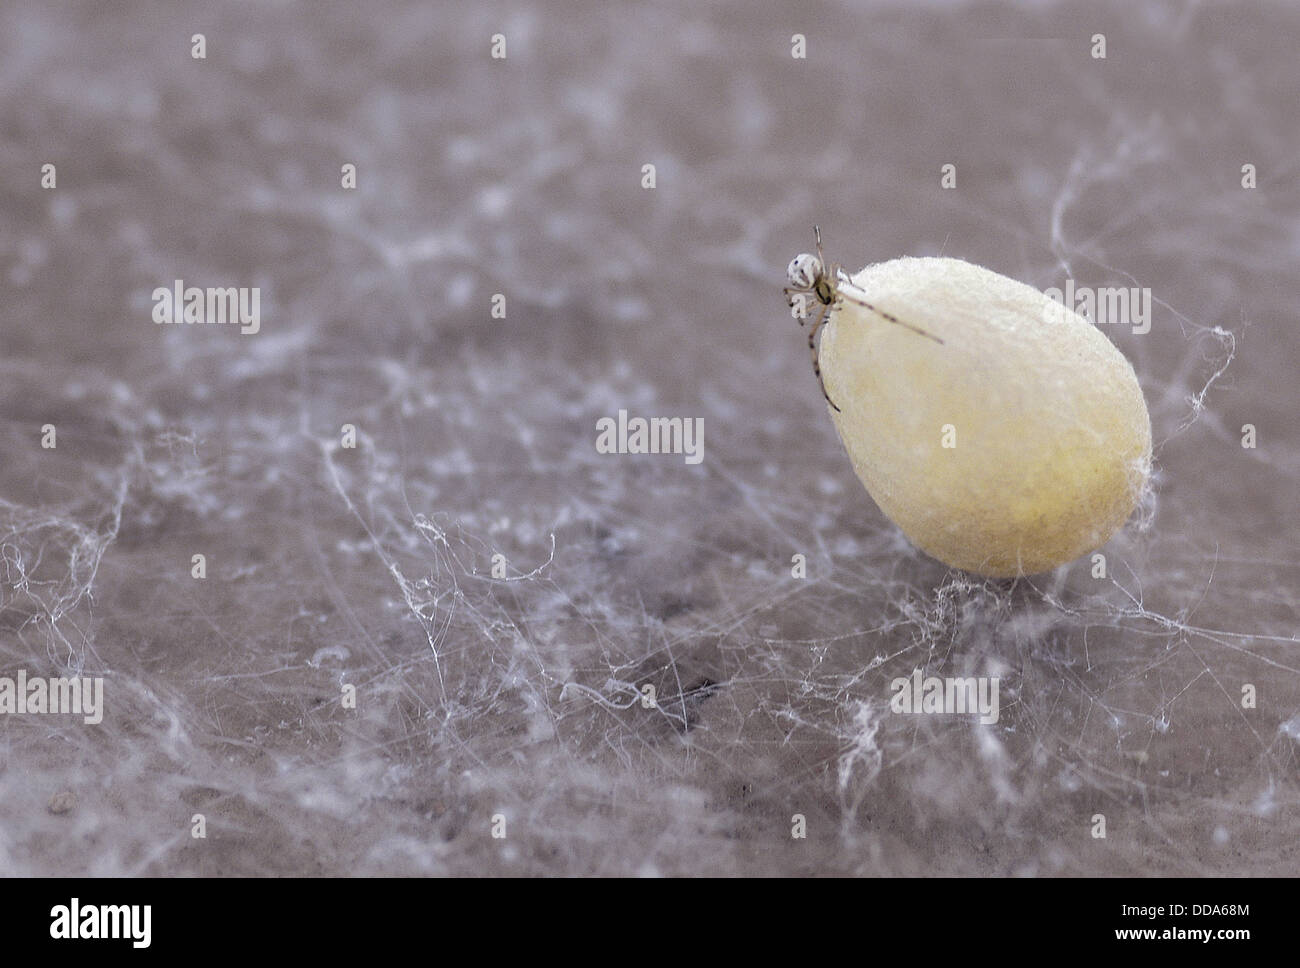 A Western black widow spider, Latrodectus hesperus, hatchling on its egg case. Stock Photo